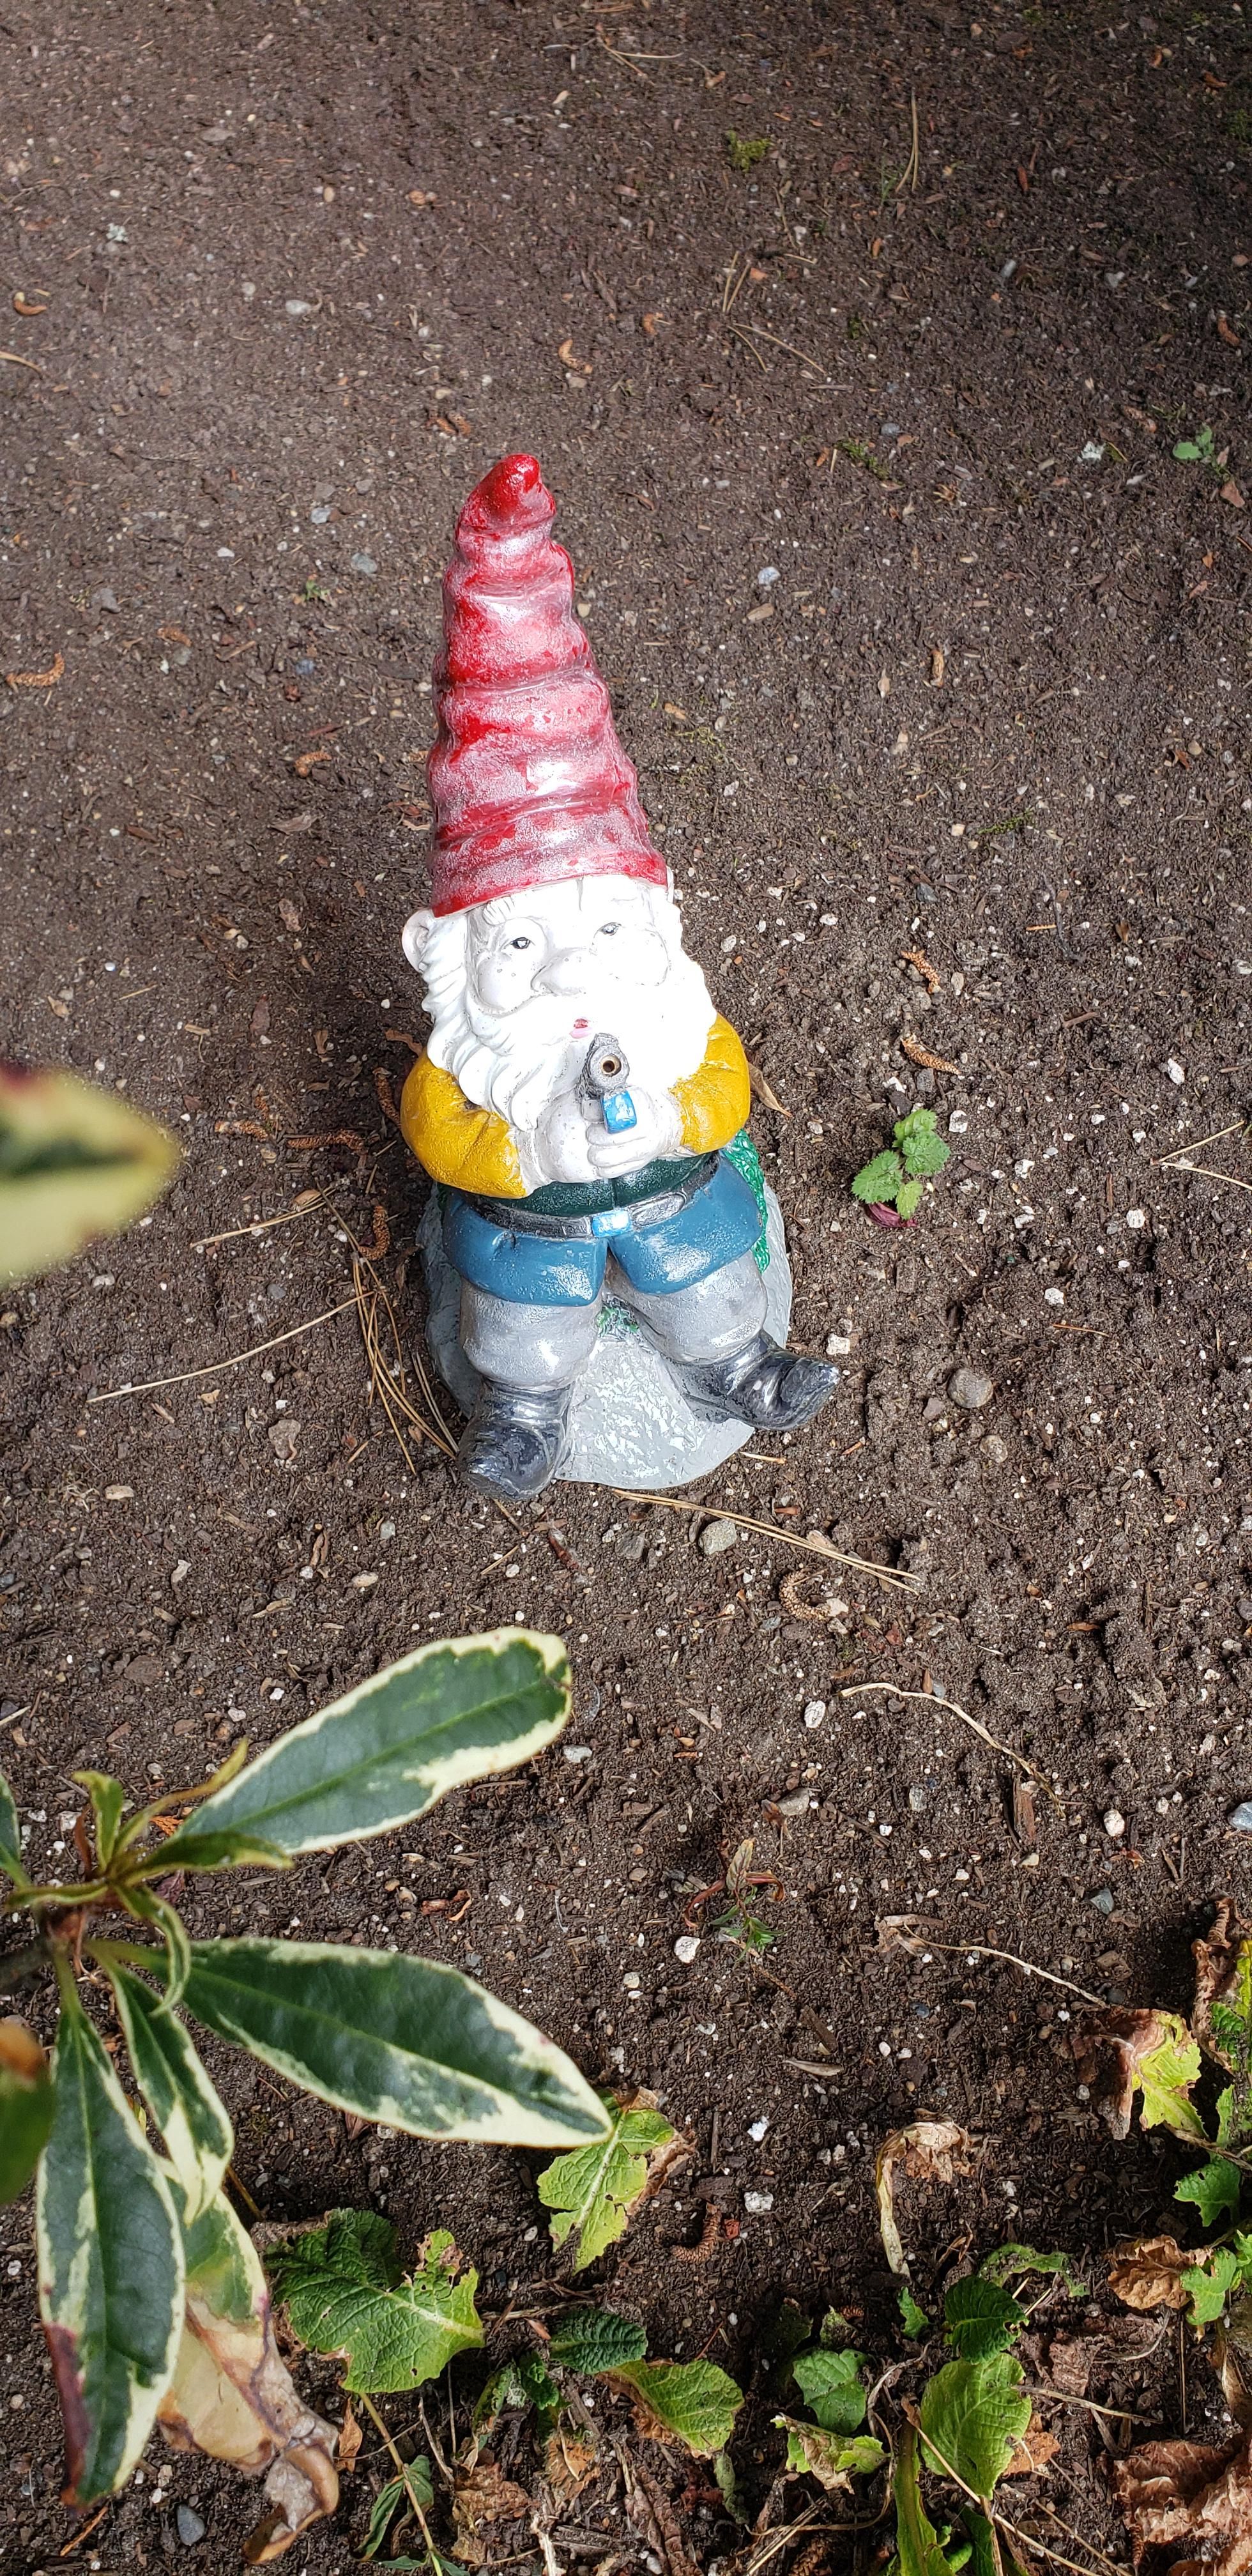 Our garden gnome lost his fishing pole and now he just looks like he's packin' heat